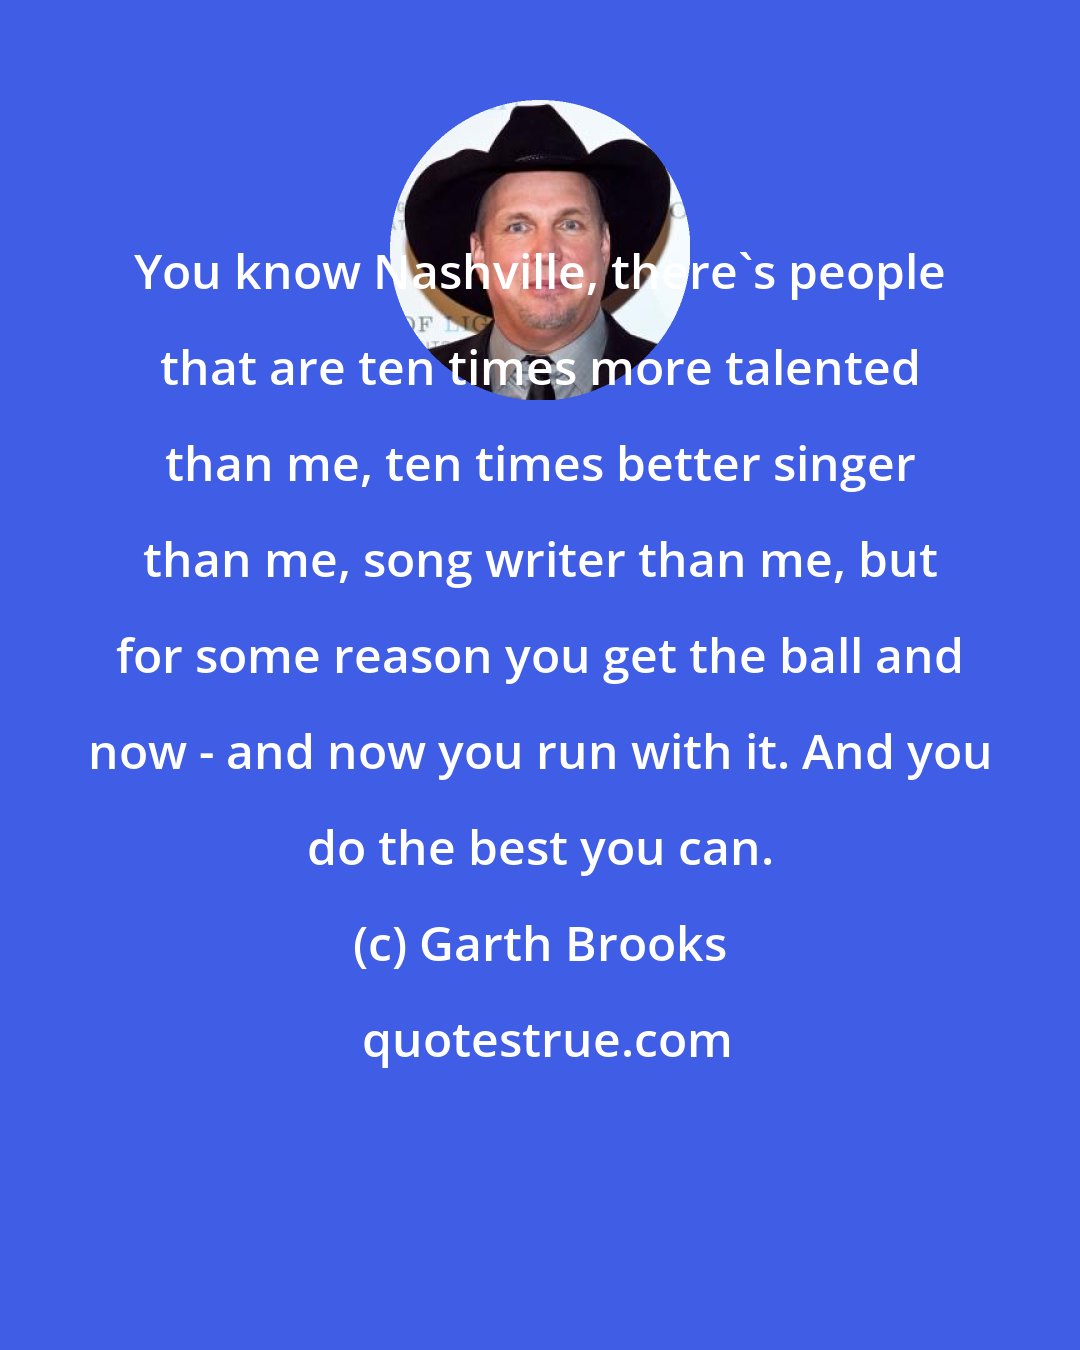 Garth Brooks: You know Nashville, there's people that are ten times more talented than me, ten times better singer than me, song writer than me, but for some reason you get the ball and now - and now you run with it. And you do the best you can.